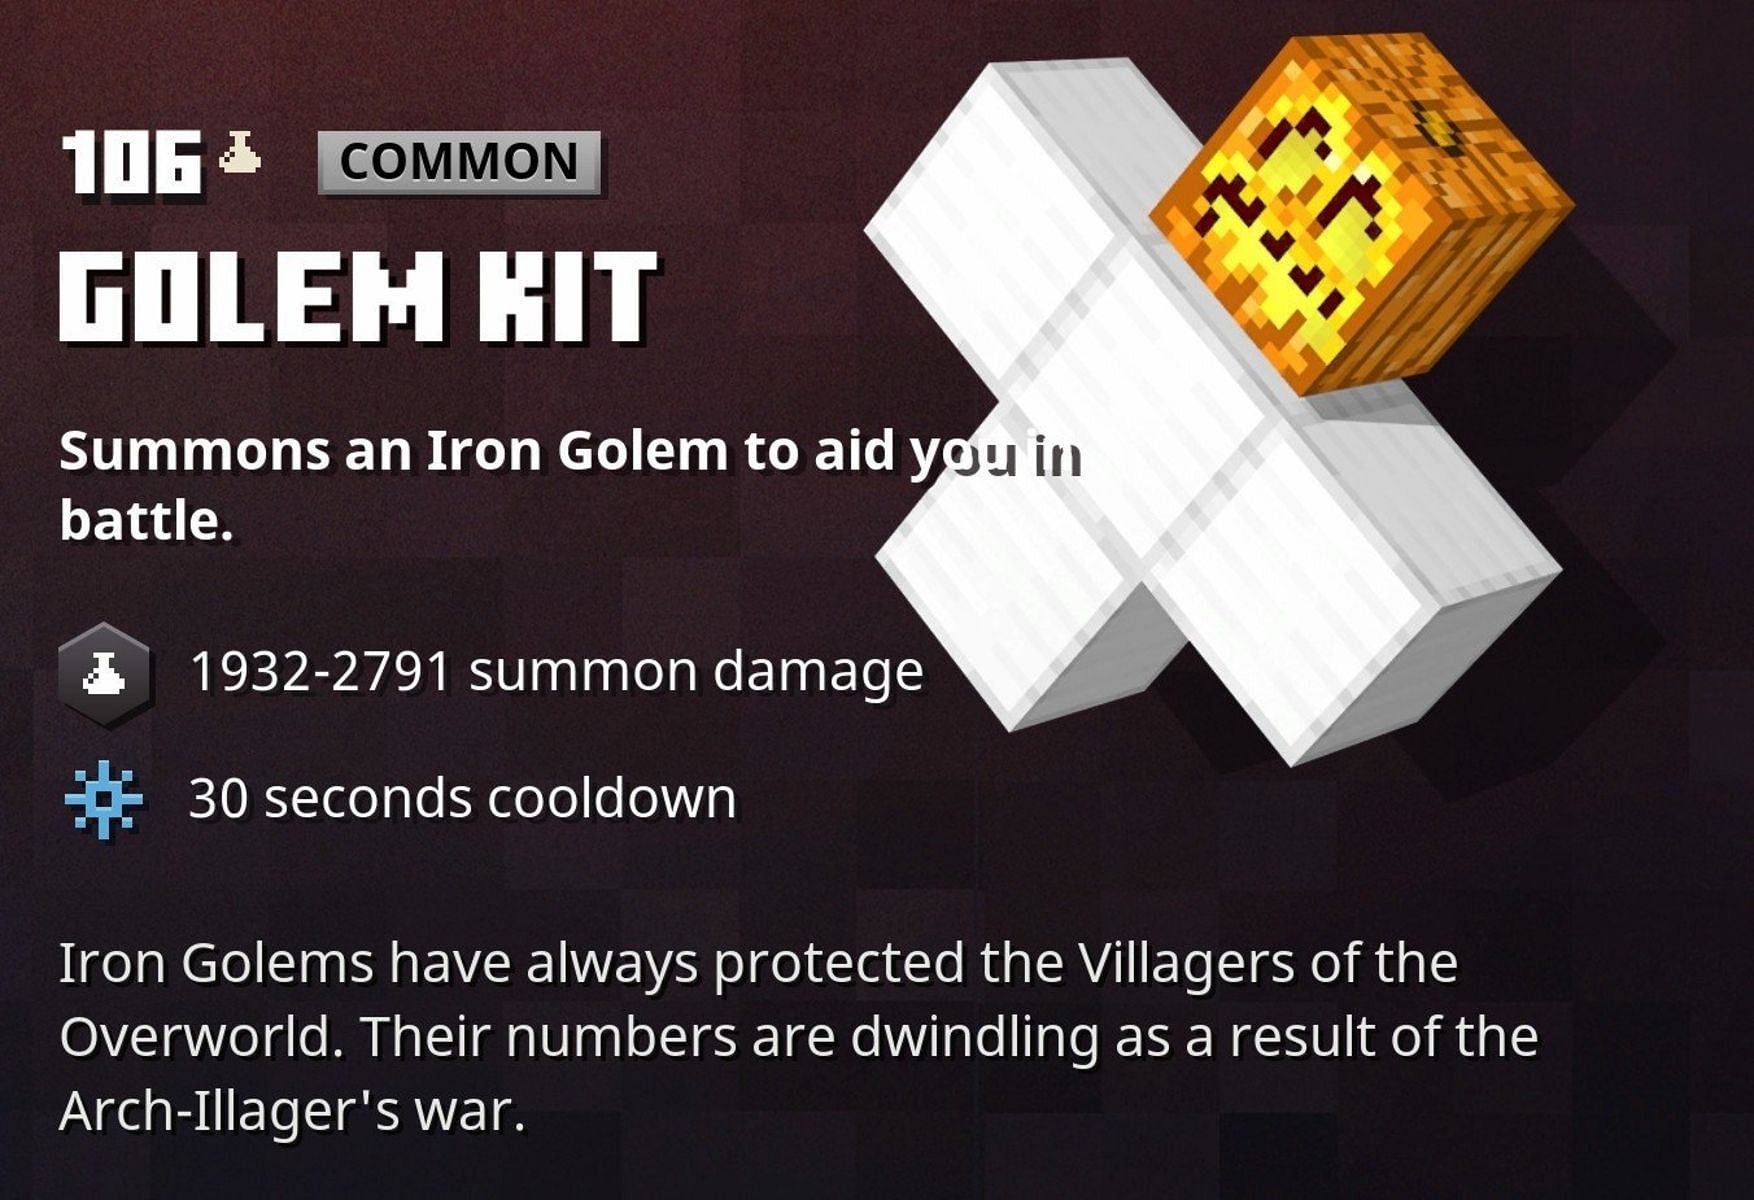 The Golem Kit artifact is used to spawn an iron golem to assist heroes in battle (Image via Mojang)